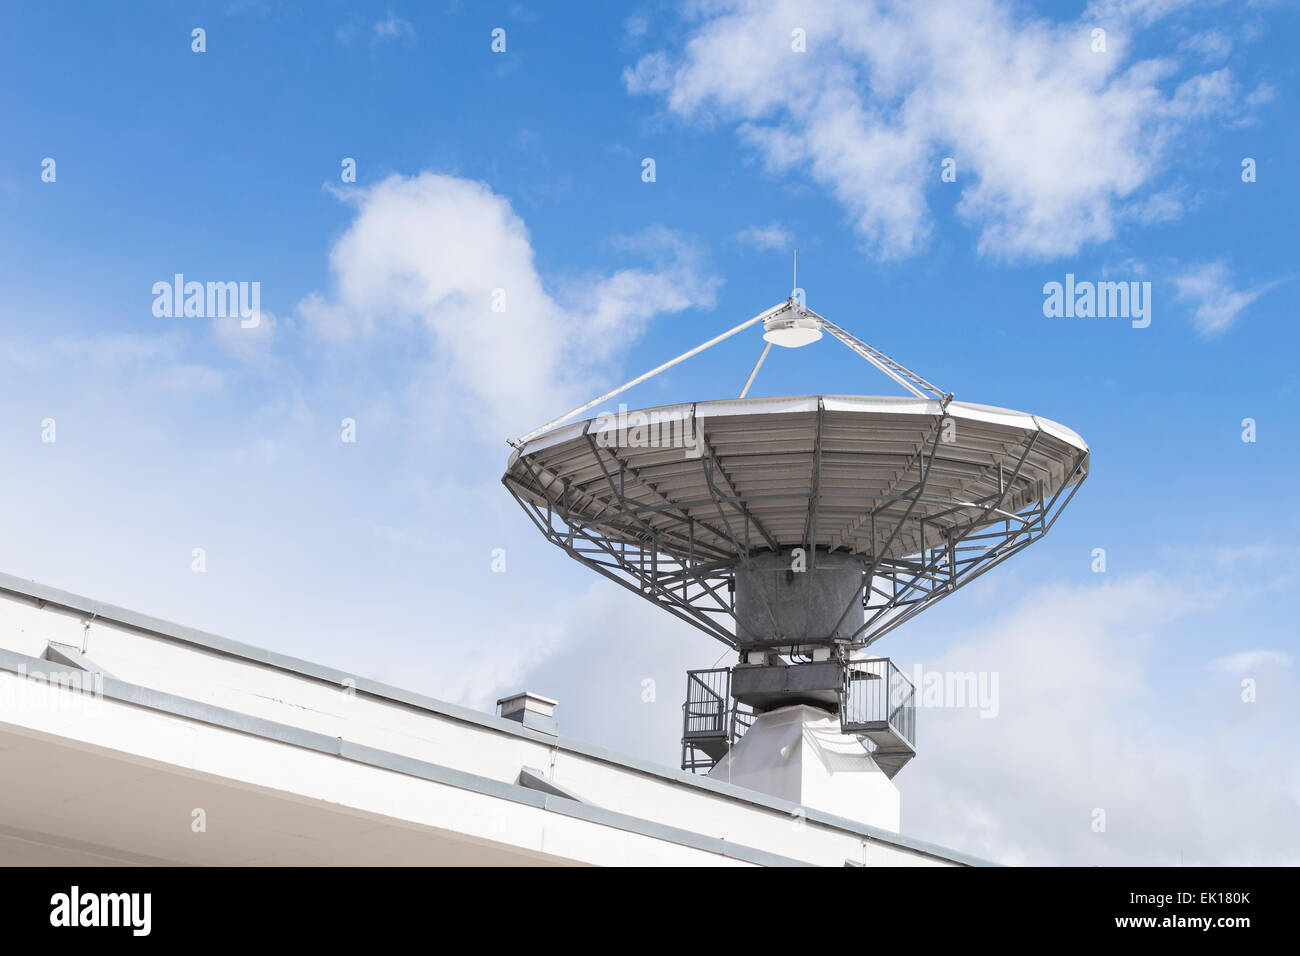 Military radiolocator station with parabolic radar antenna dish is part of missile defense antimissile system Stock Photo